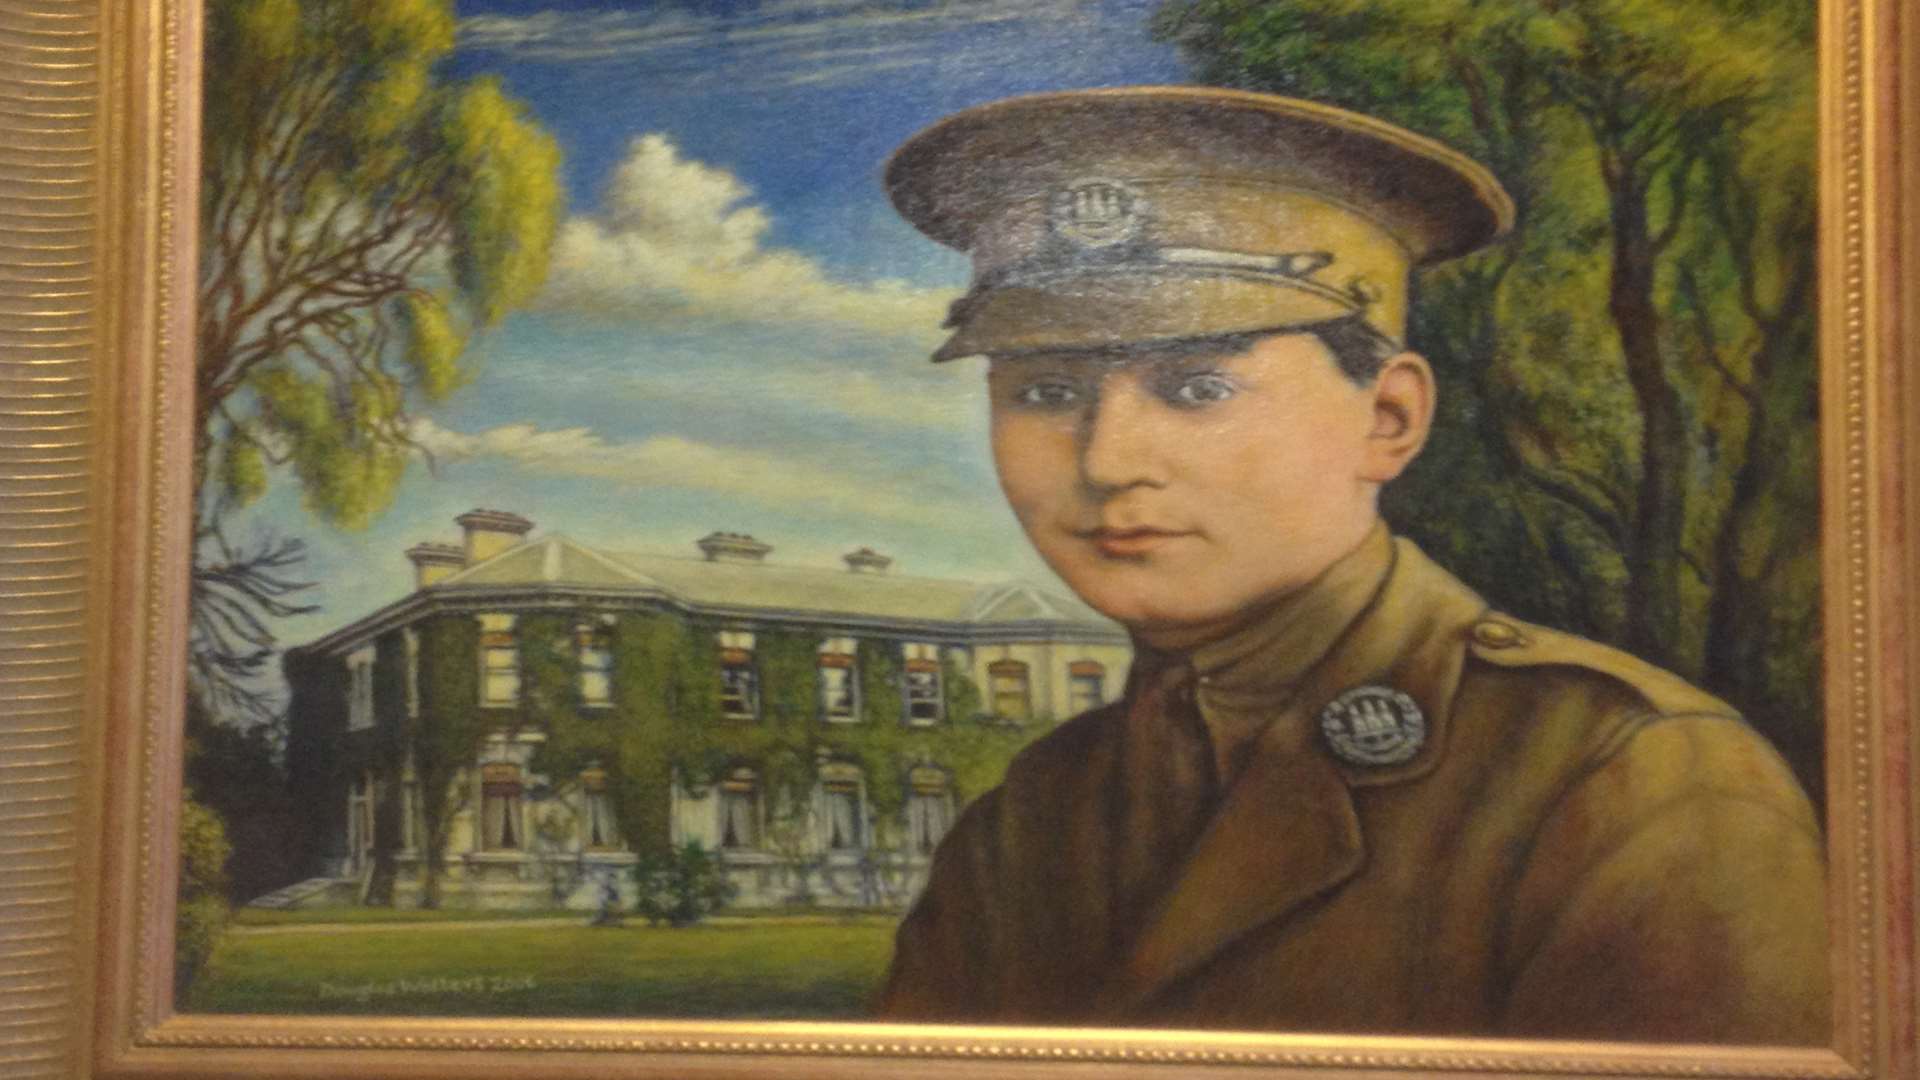 Cpt Thomas Riversdale Colyer-Fergusson has a painting and a citation in the mayoral corridor at the Civic Centre in Gravesend